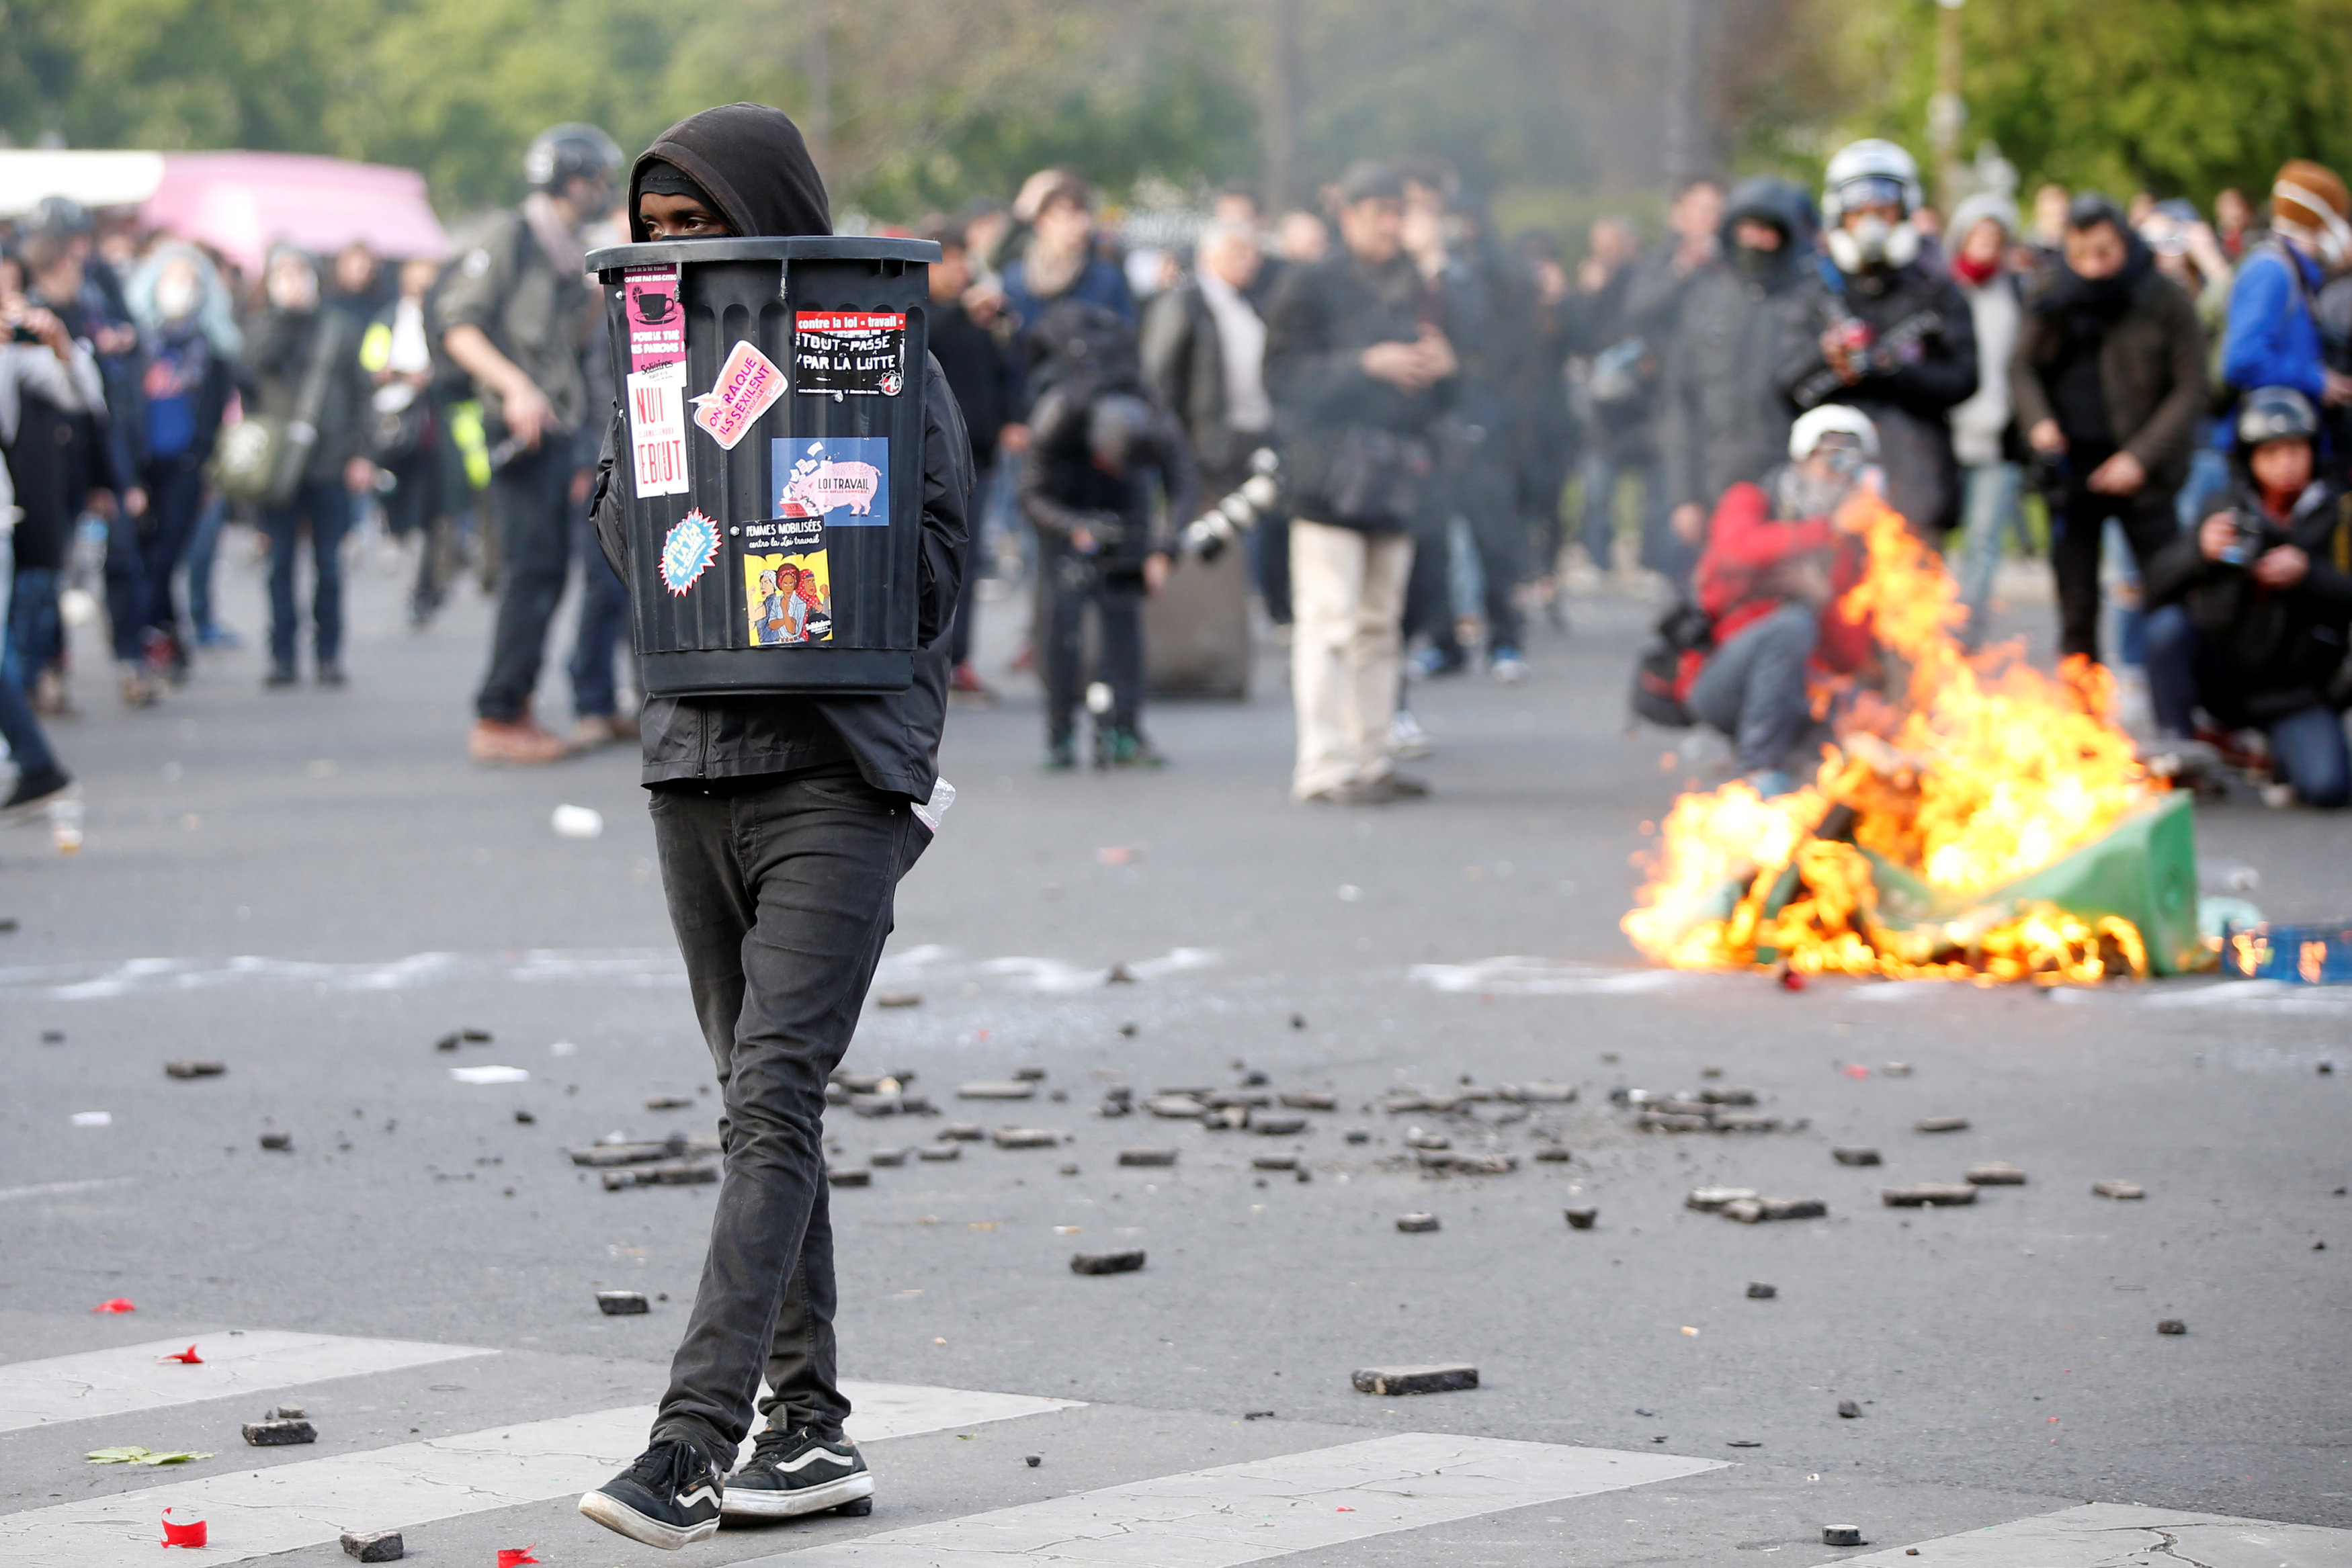 Masked youths face off with French police during a demonstration against the French labour law proposal in Paris, France, as part of a nationwide labor reform protests and strikes, April 28, 2016.